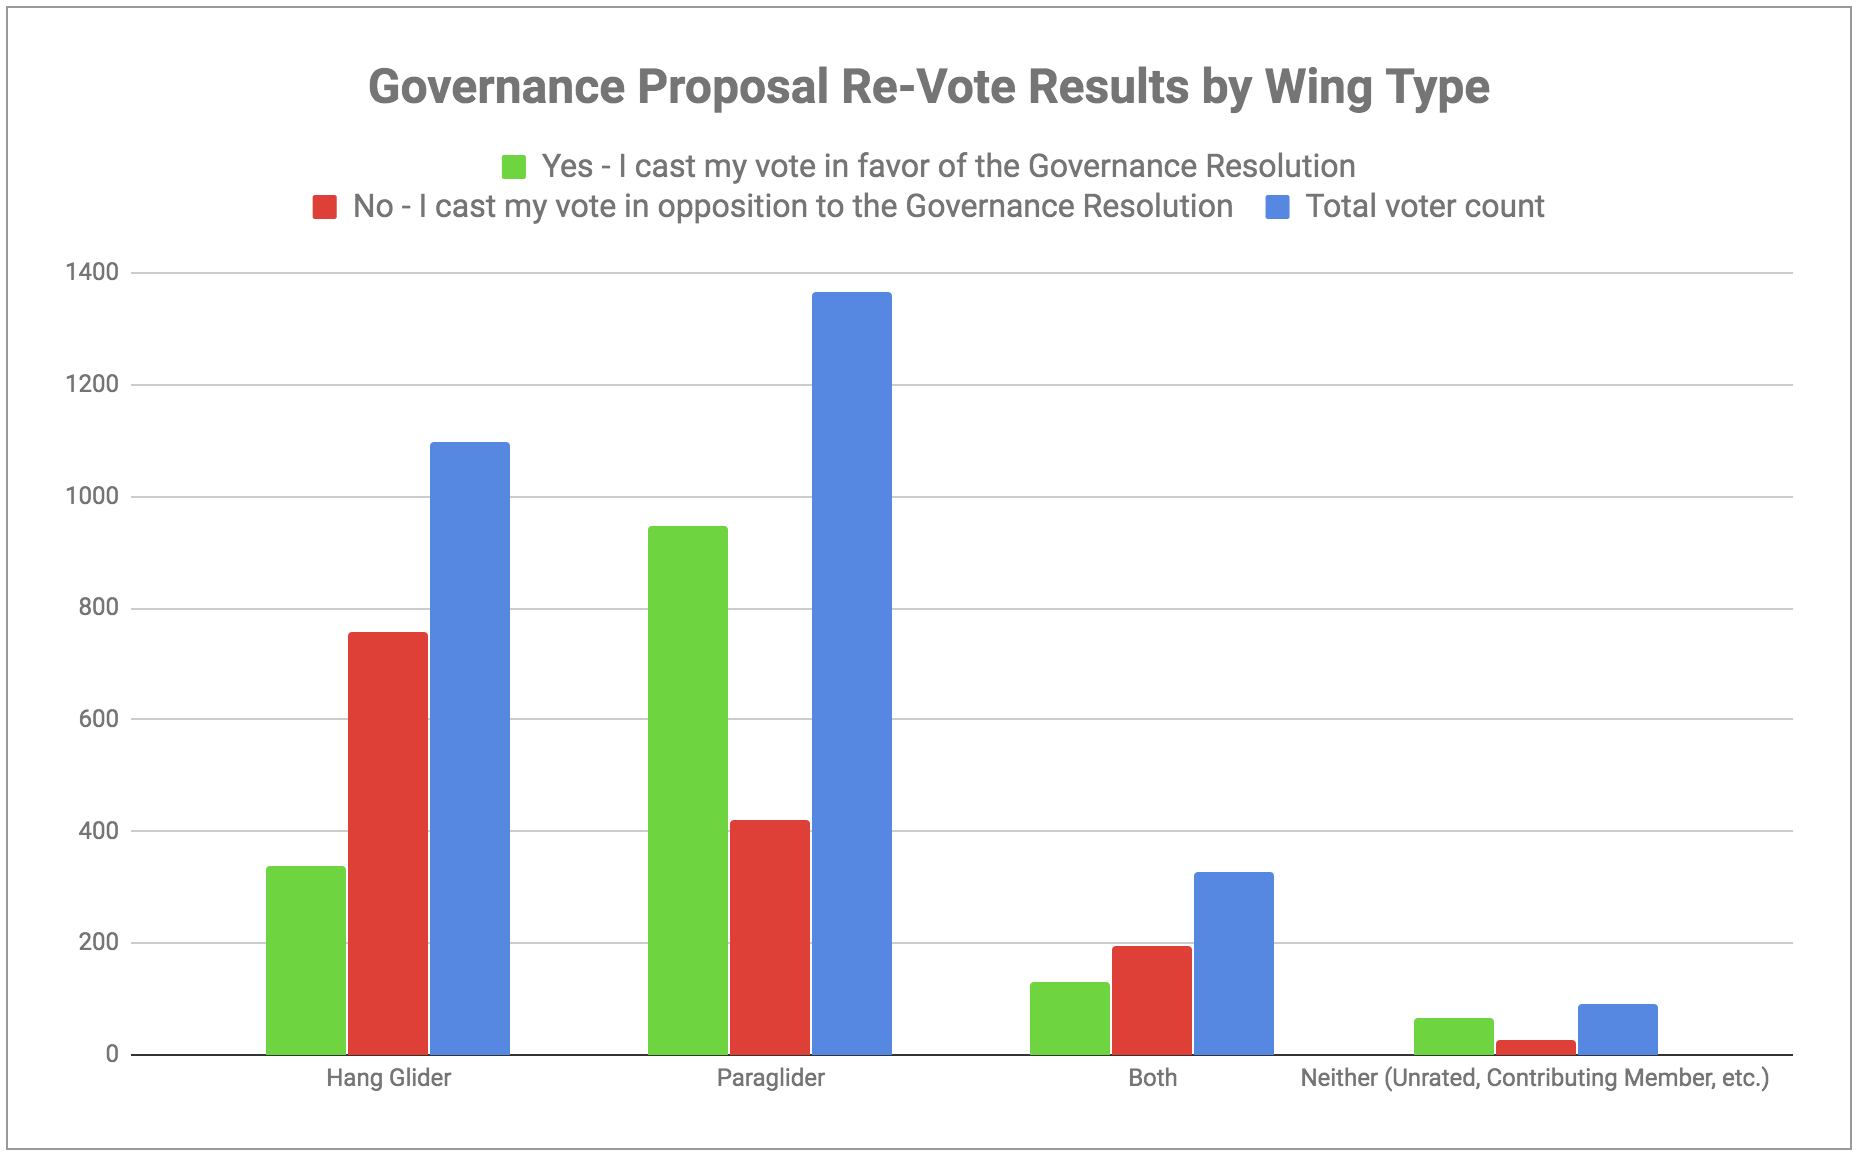 Re-Vote Results by Wing Type